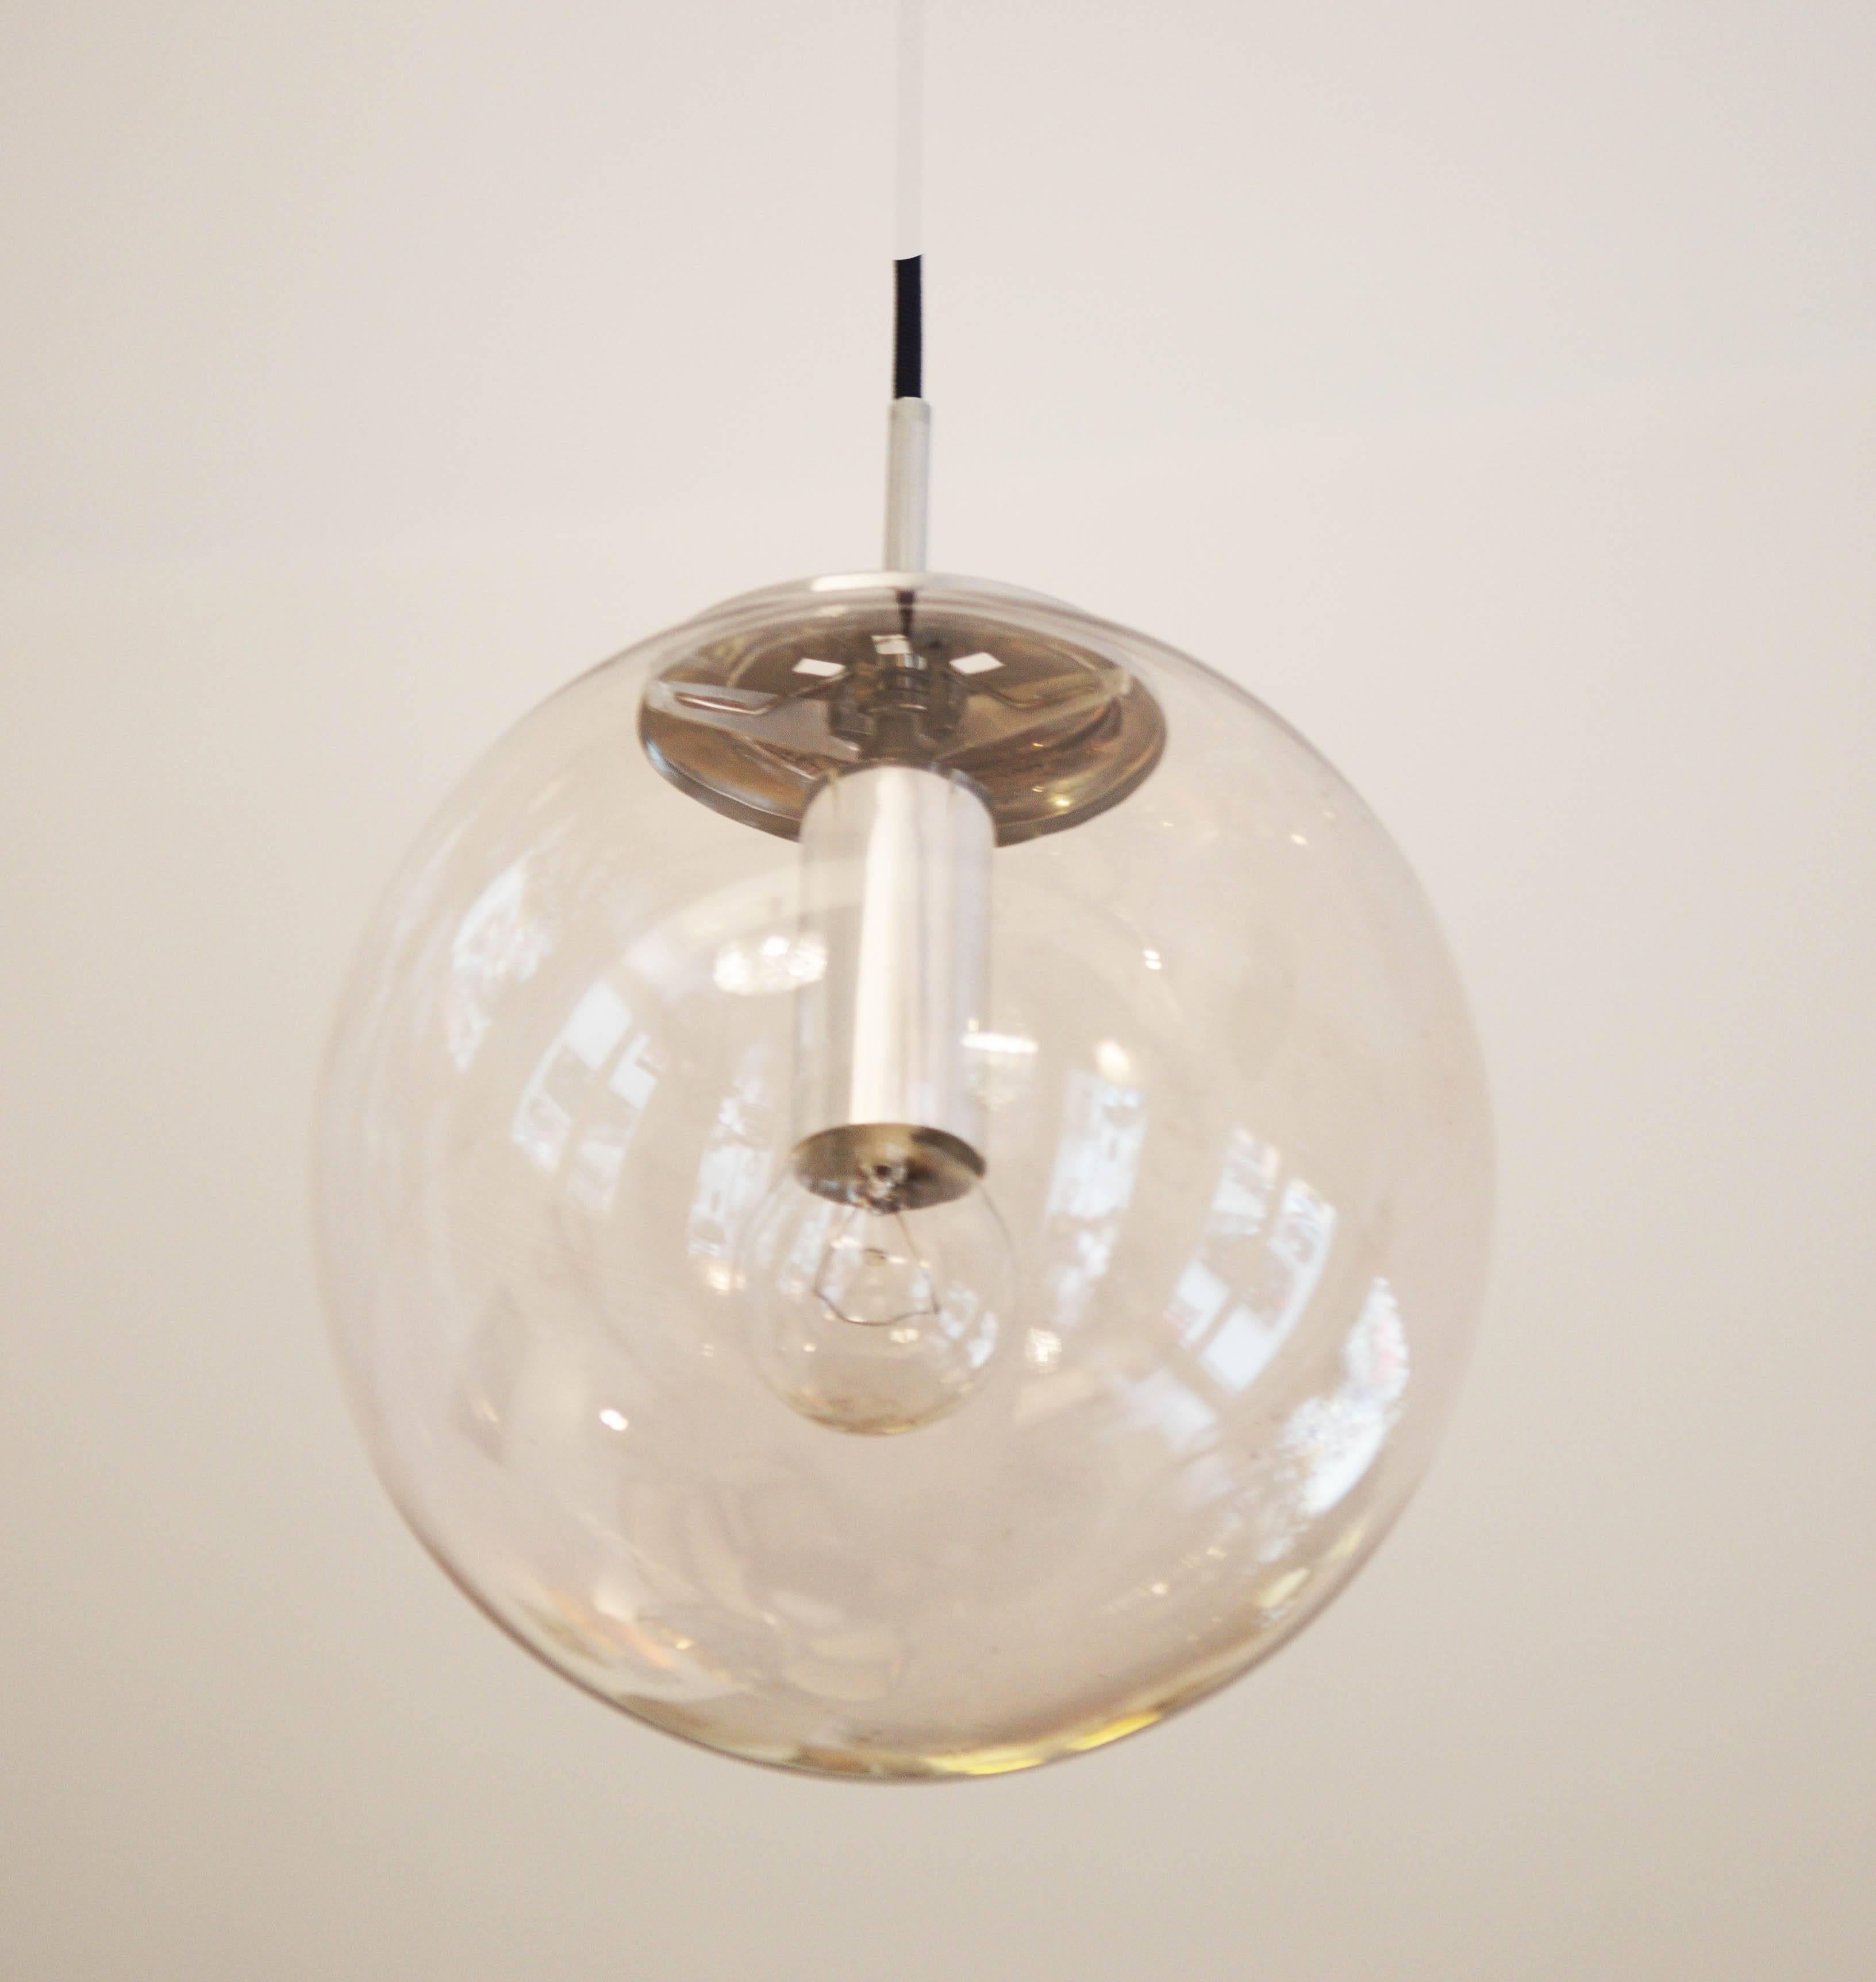 Large ball pendant by Glashütte Limburg model 4103rd.
The ball is handblown and consists of crystal antique glass.
Small bubble inclusions provide a great lighting experience.
The structure and the canopy is made of chromed metal.
The cable is